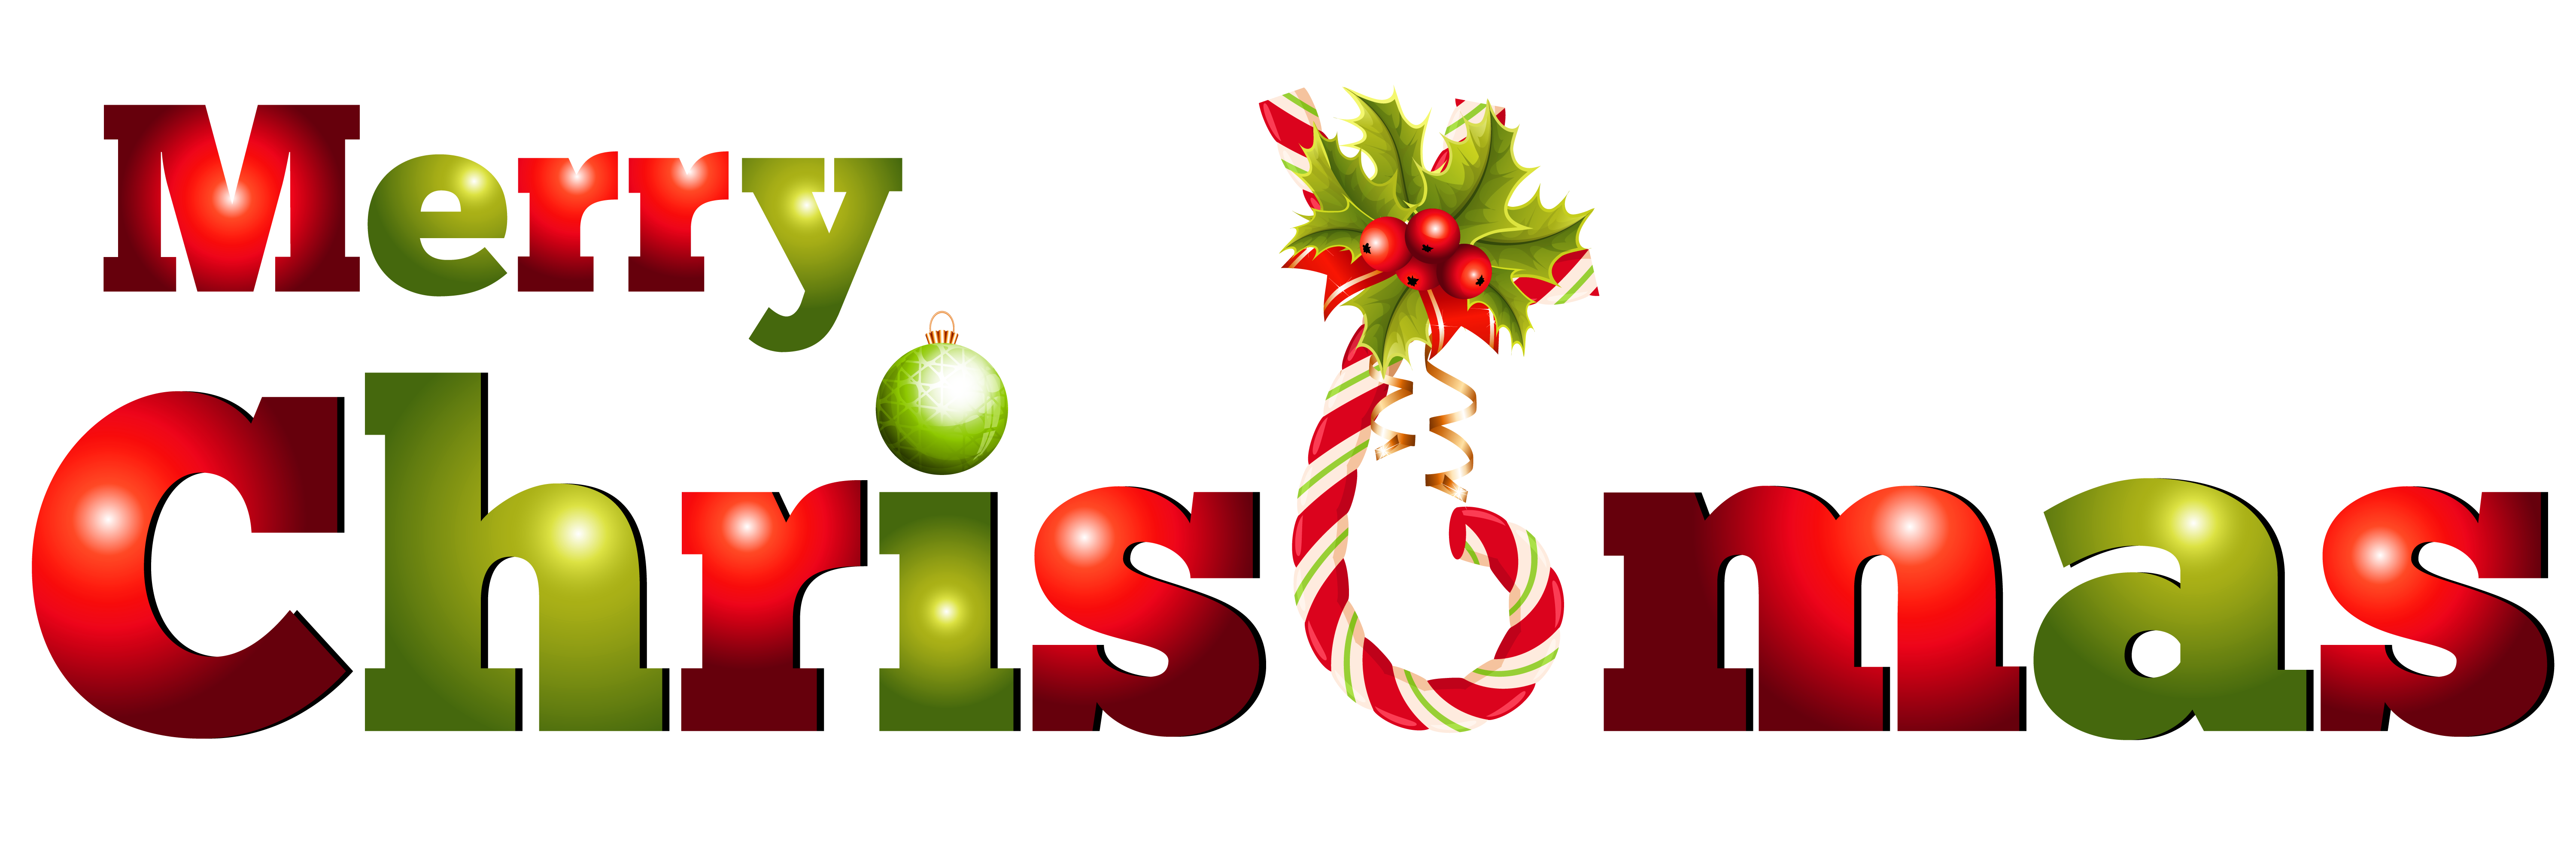 Merry Christmas Clip Art (04) - Merry Christmas Clipart Images